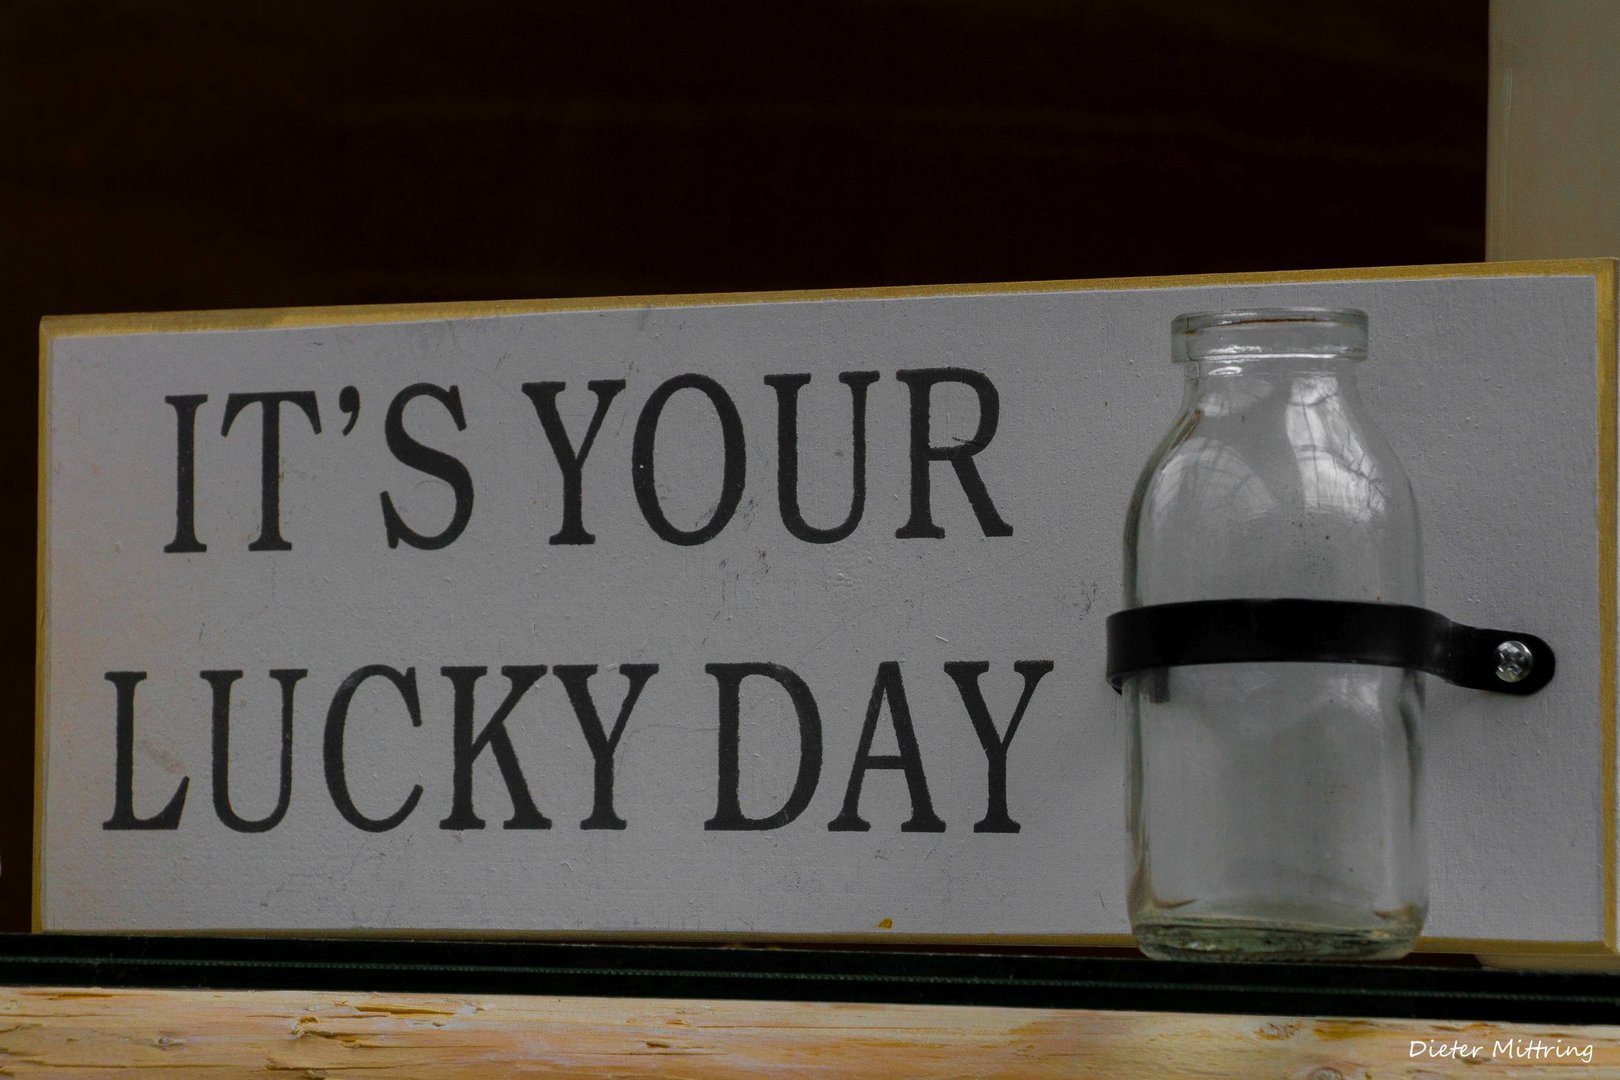 "It´s your lucky day"